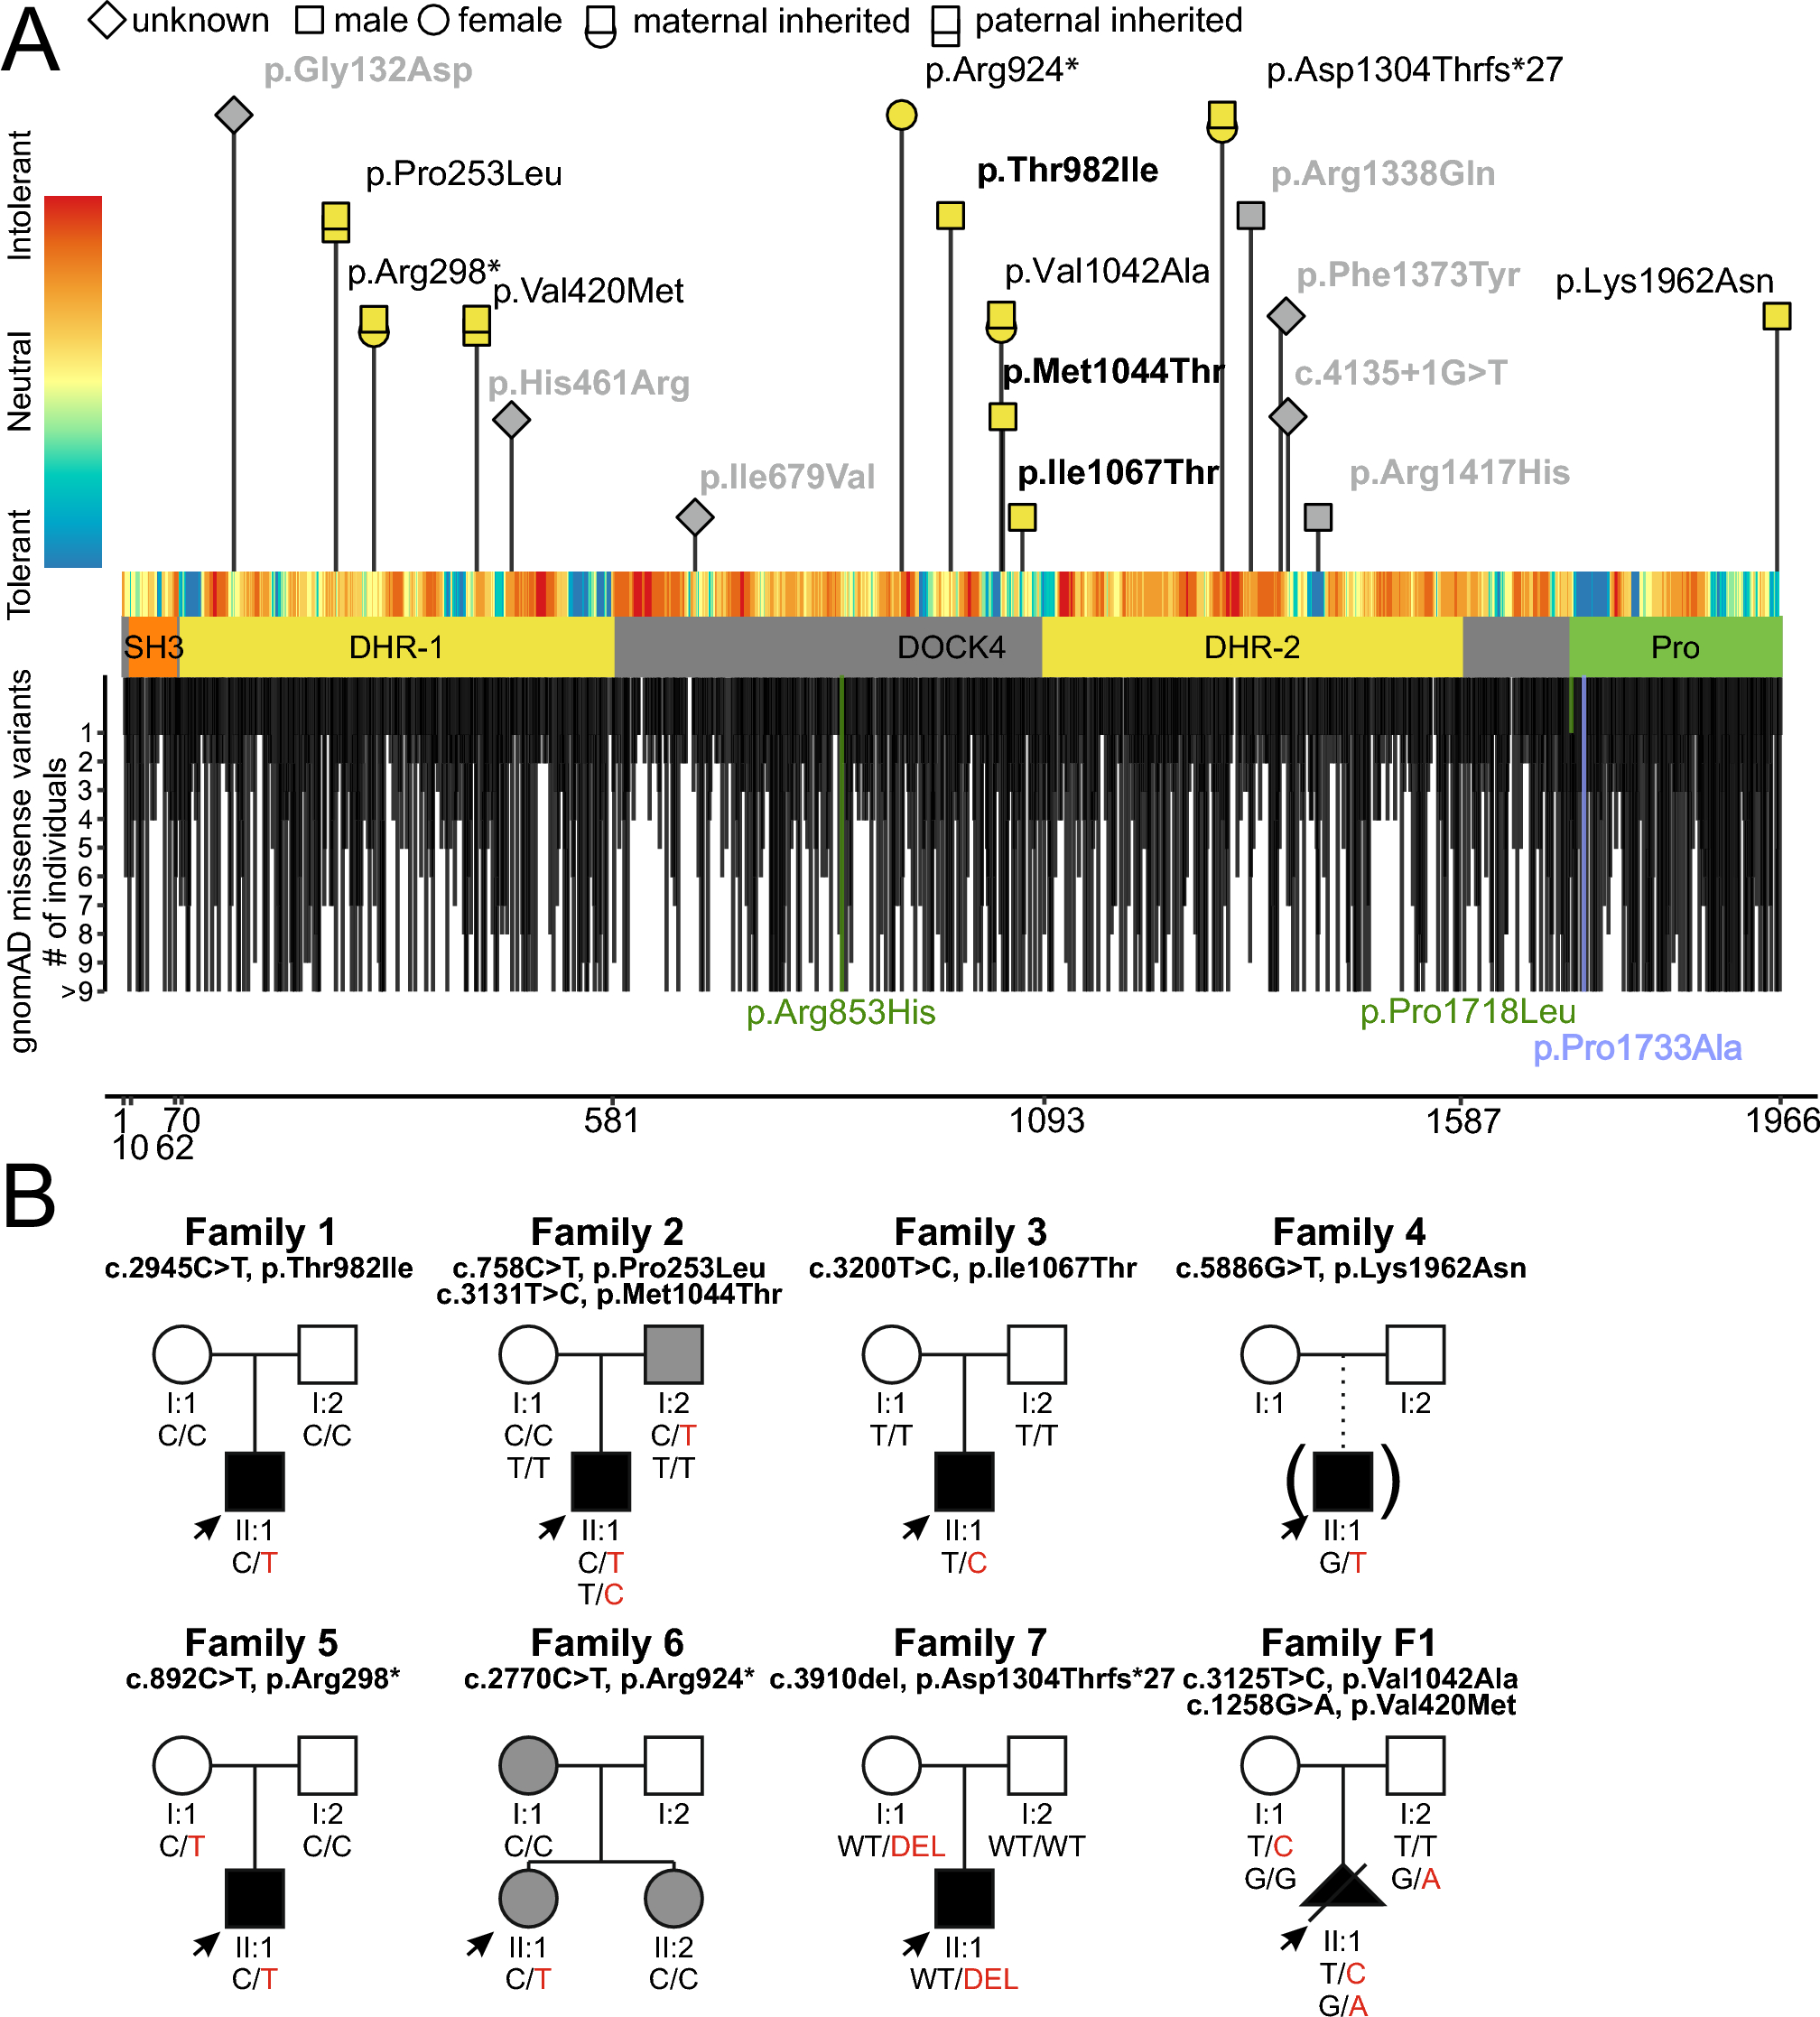 Heterozygous loss-of-function variants in DOCK4 cause neurodevelopmental delay and microcephaly